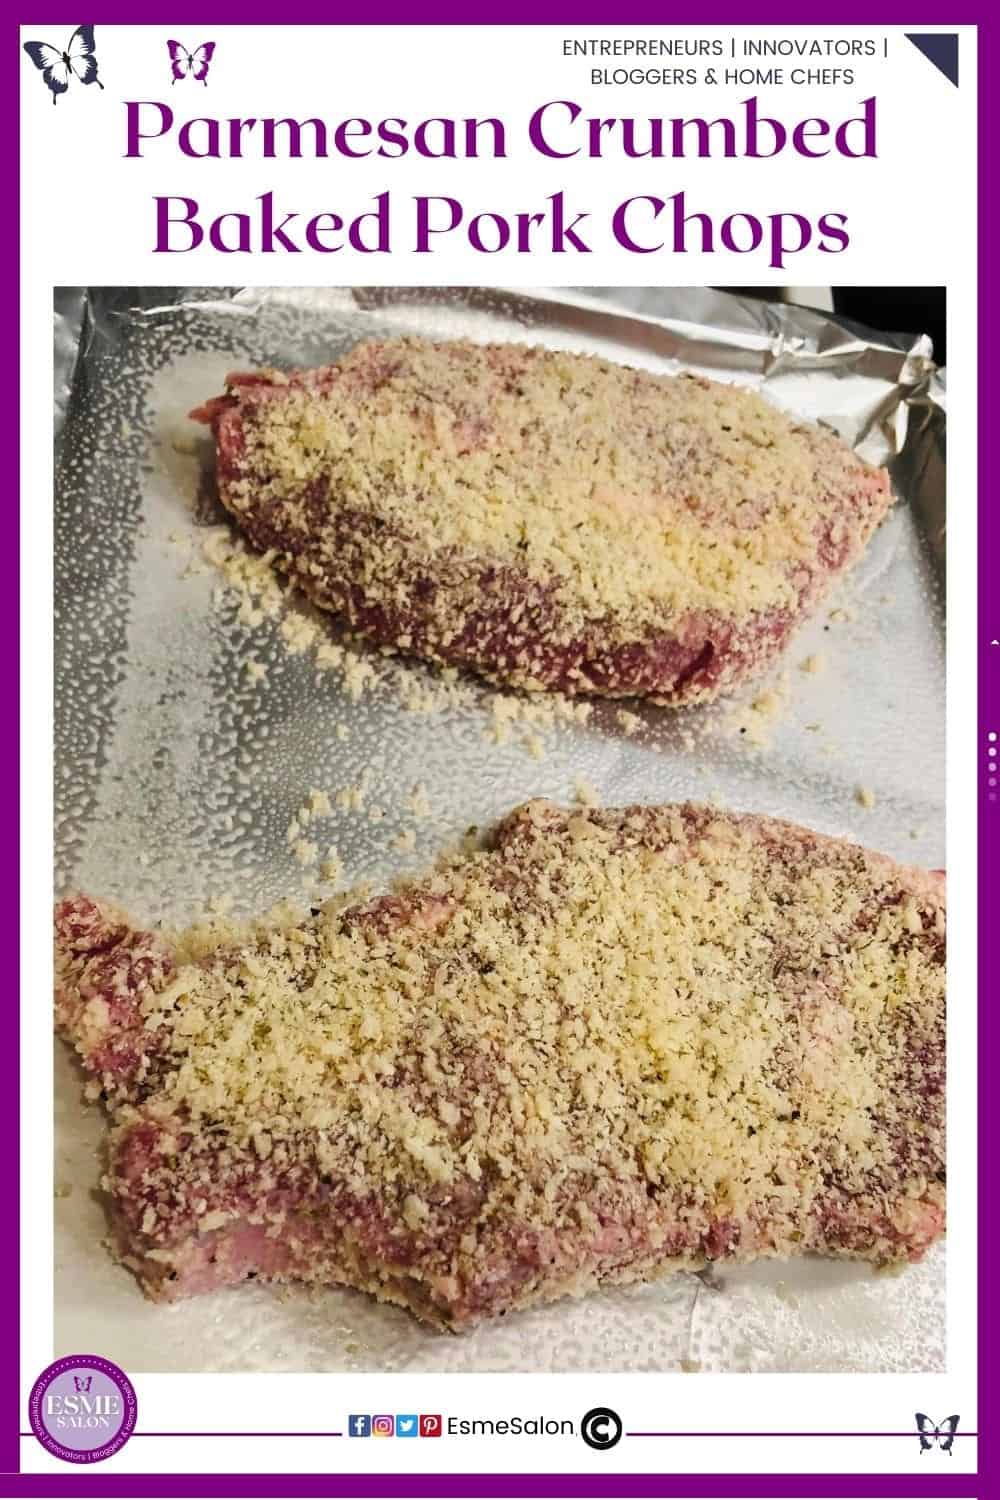 an image of Parmesan Crumbed Baked Pork Chops, ready to be baked